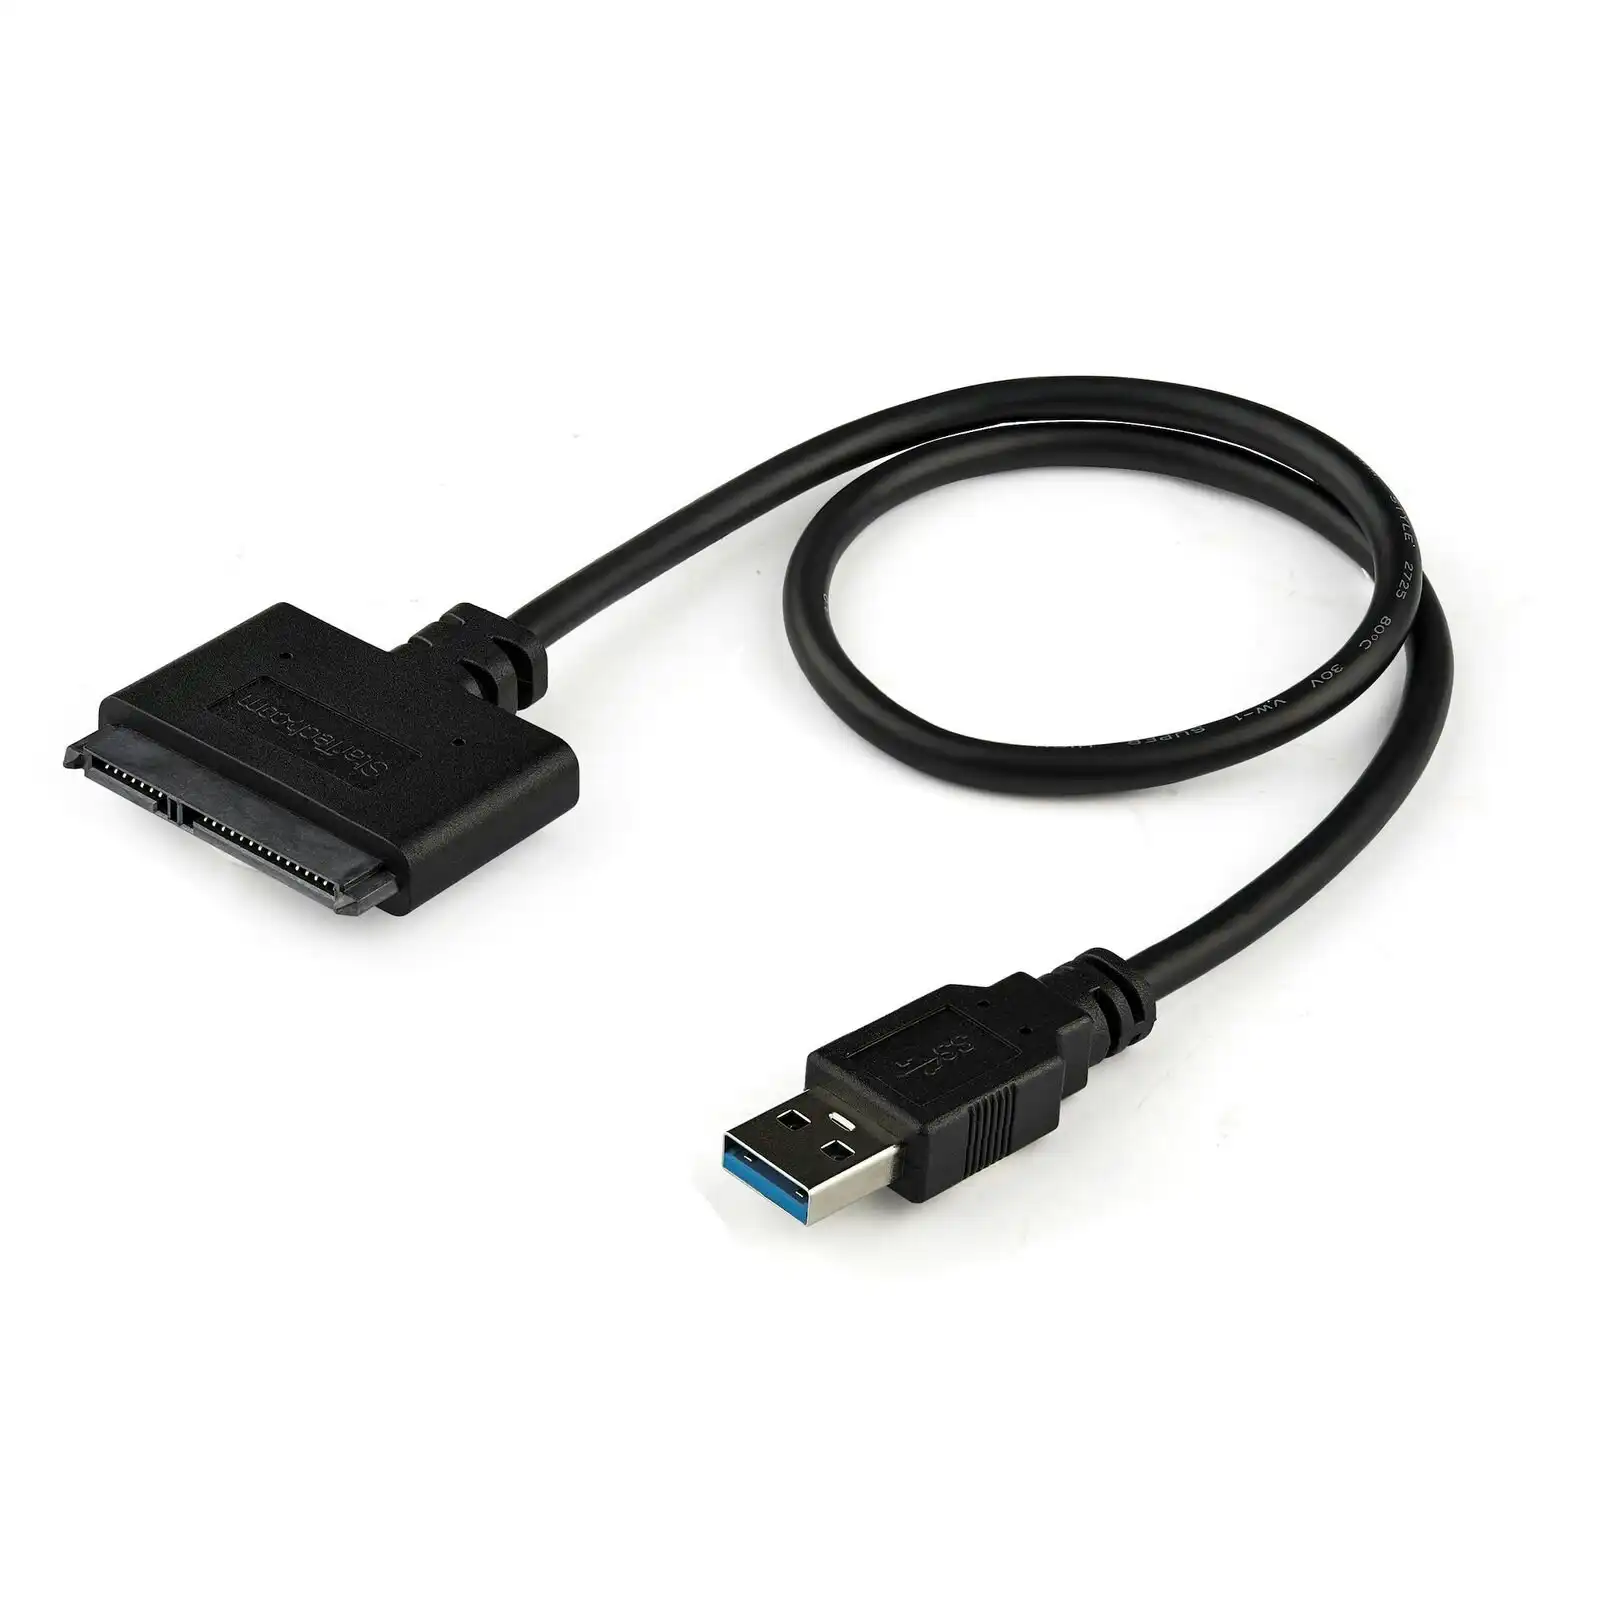 Star Tech 6Gbps USB-A 3.0 to SATA Adapter Transfer Cable for 2.5" SSD/HDD Drive